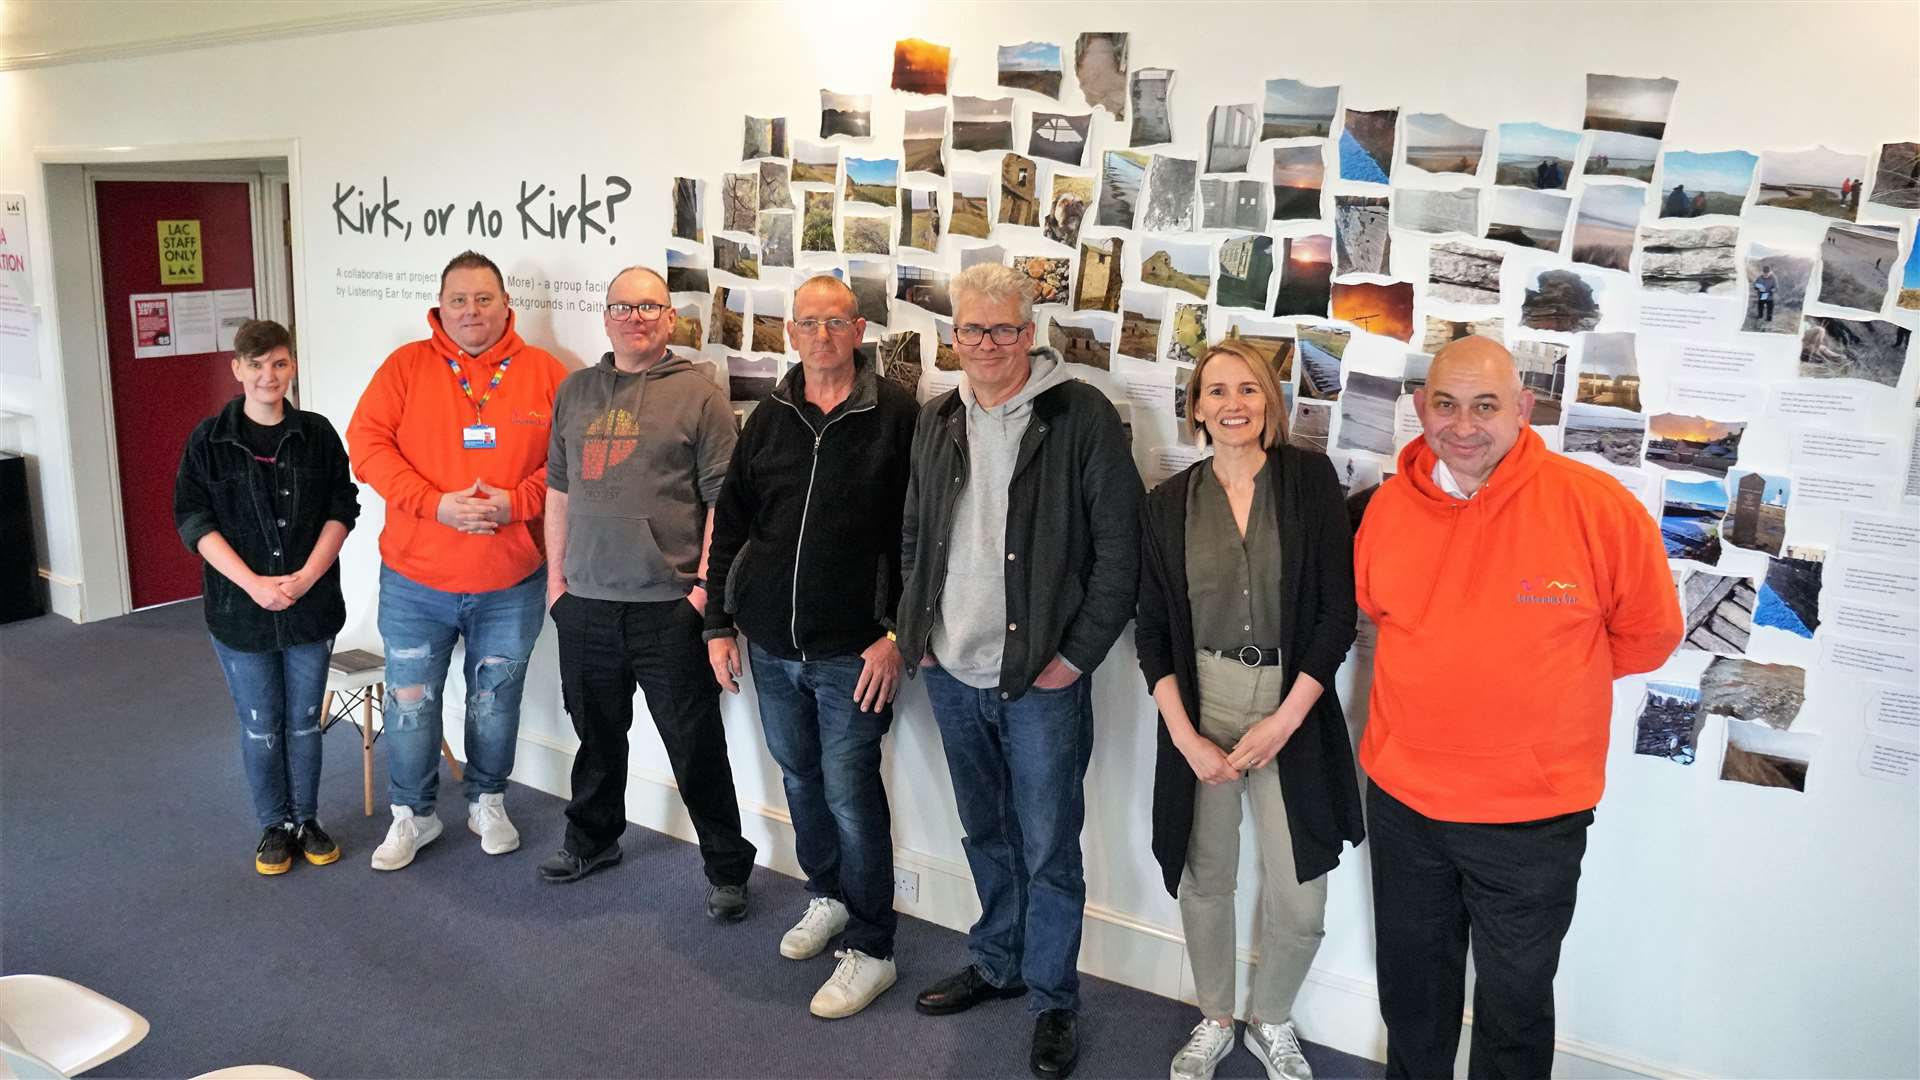 Keisha Sutherland, far left, provided music for the group and Lisa Poulsen, second from right, hosted the exhibition by members of the Join in More group. Picture: DGS